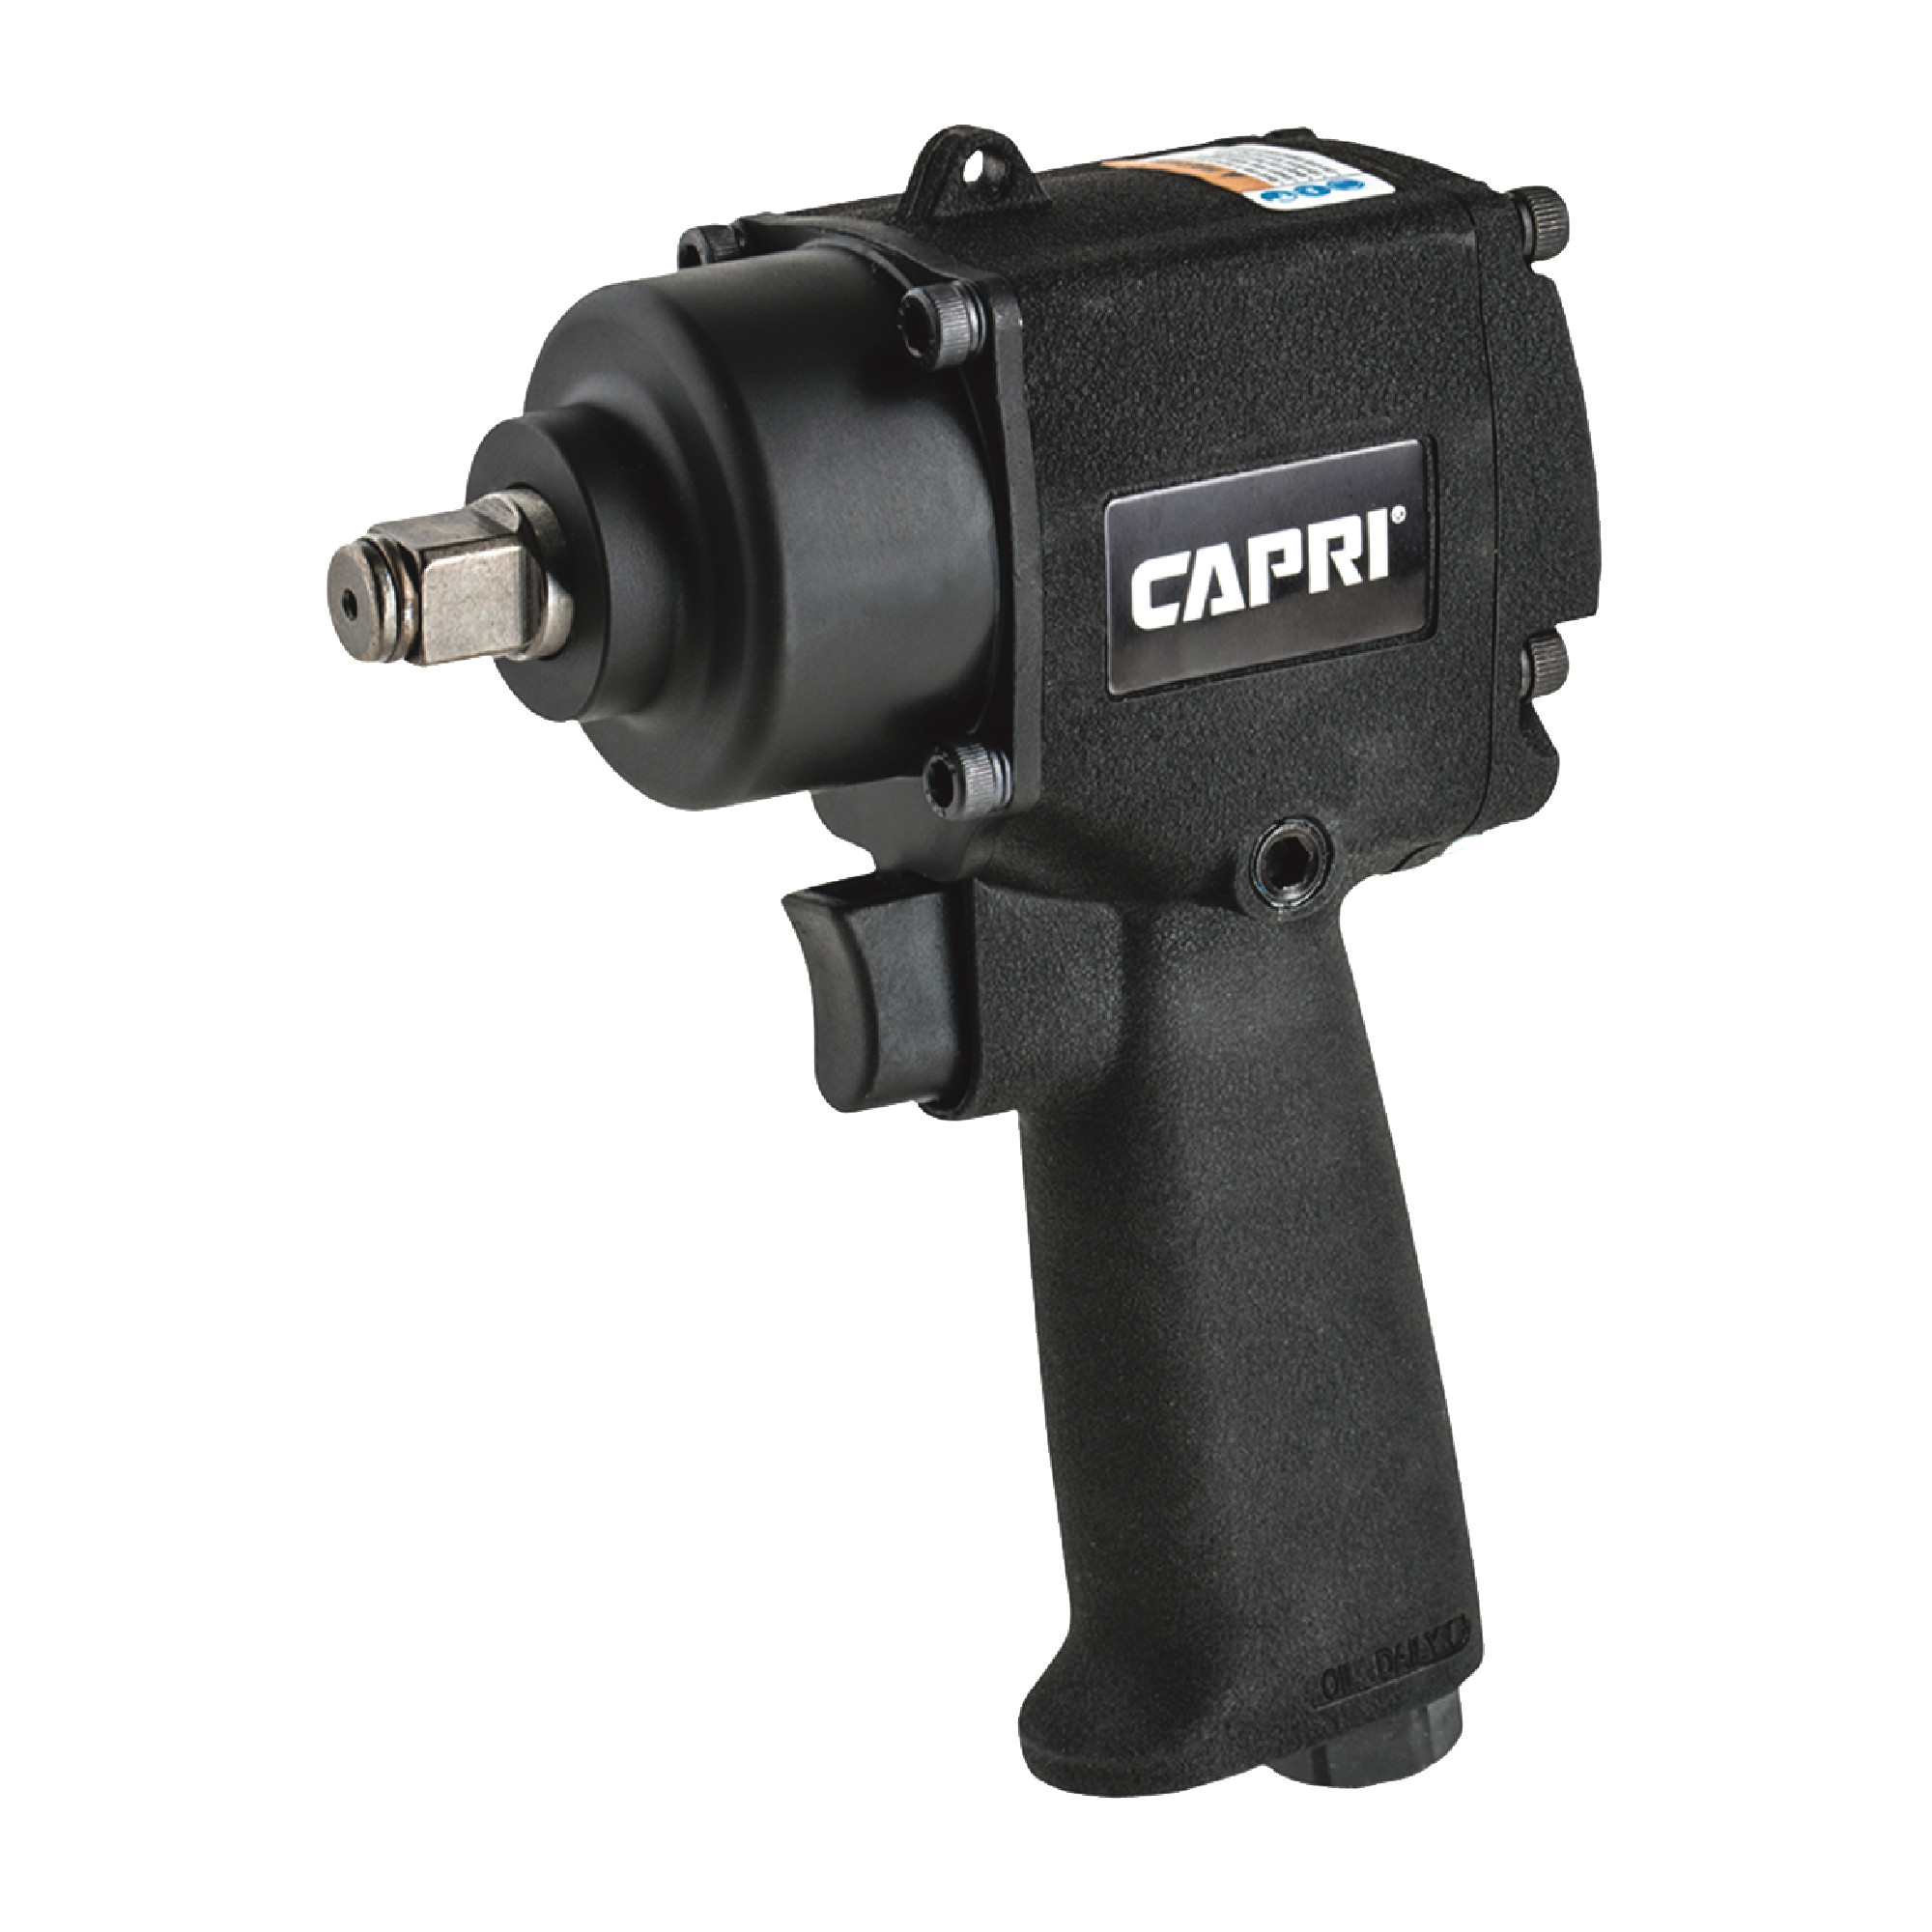 1/2" Compact Impact Wrench